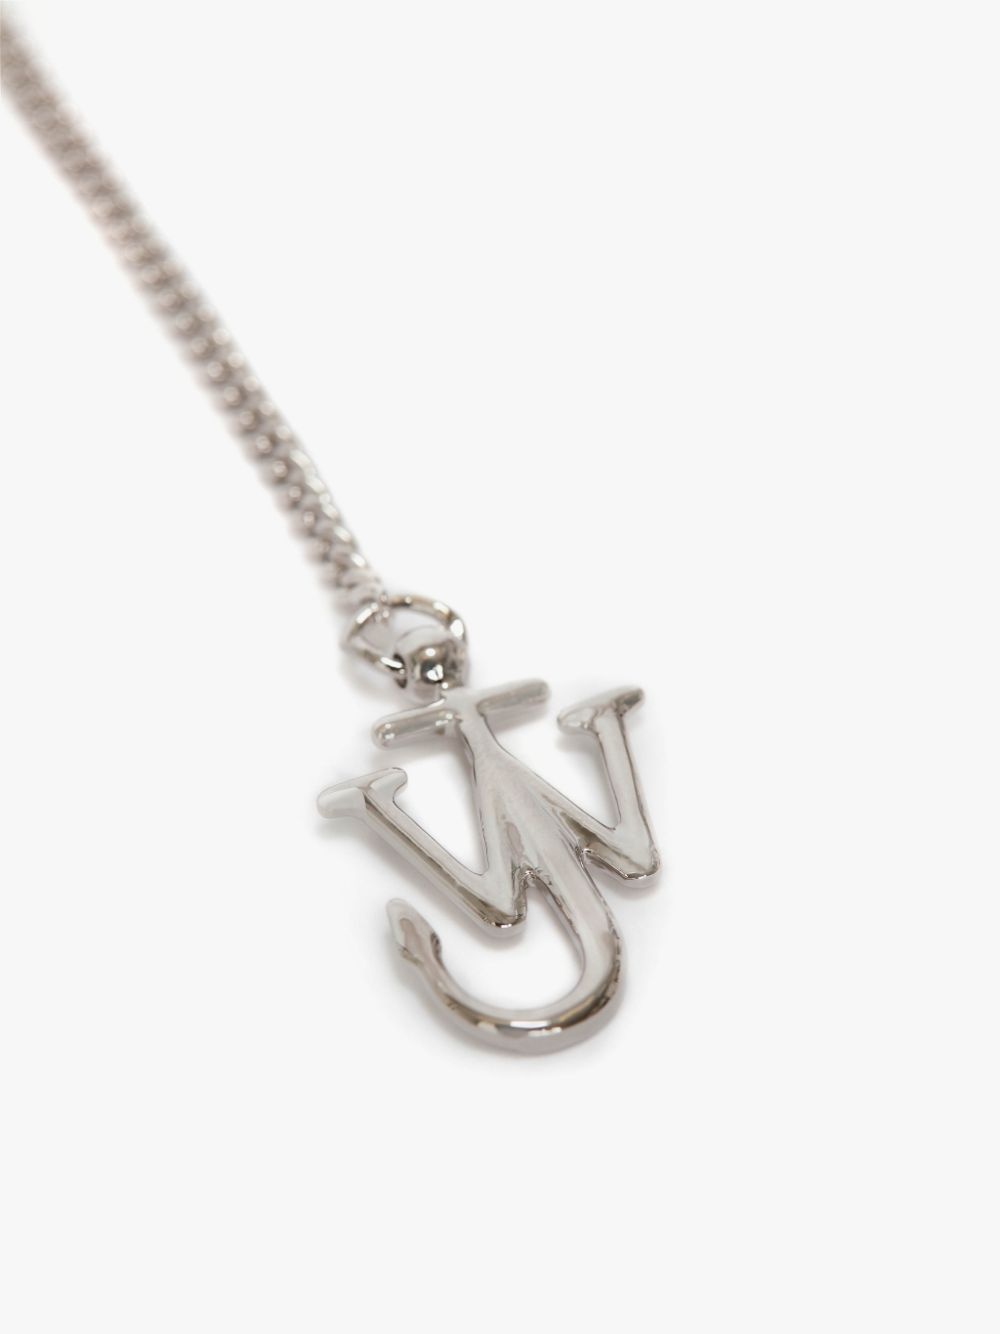 LONG NECKLACE WITH JWA ANCHOR PENDANT - 4